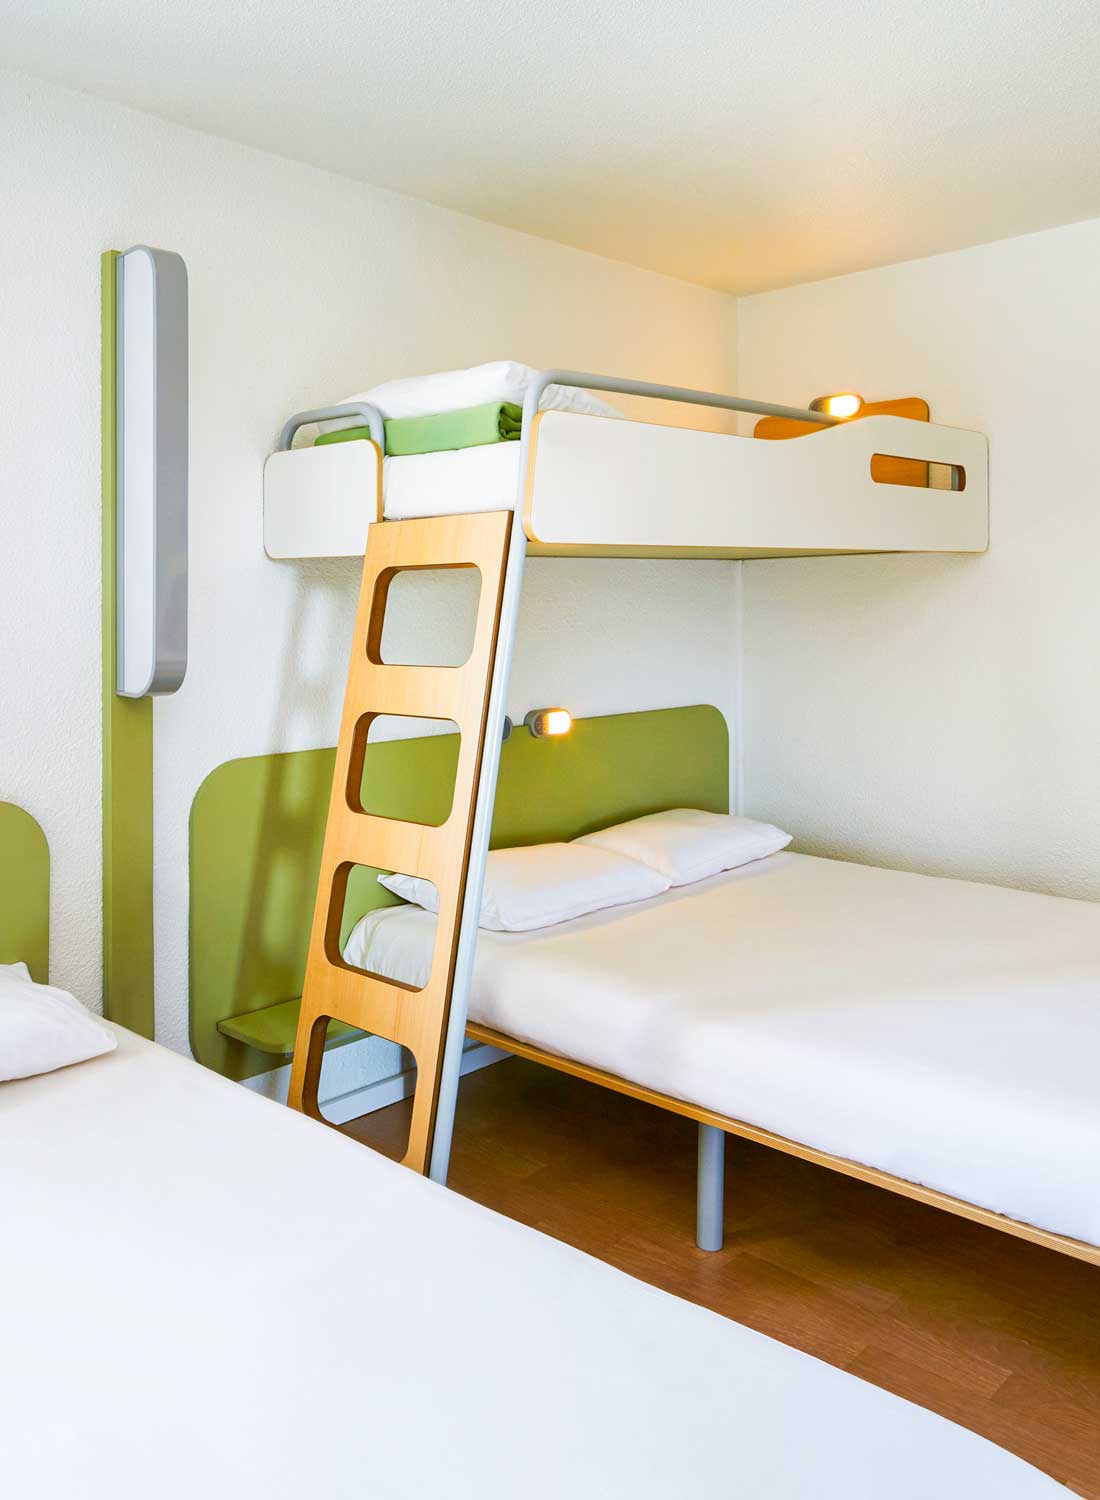 Groupe MyHotels – Ibis Budget Chartres – Chambre familiale